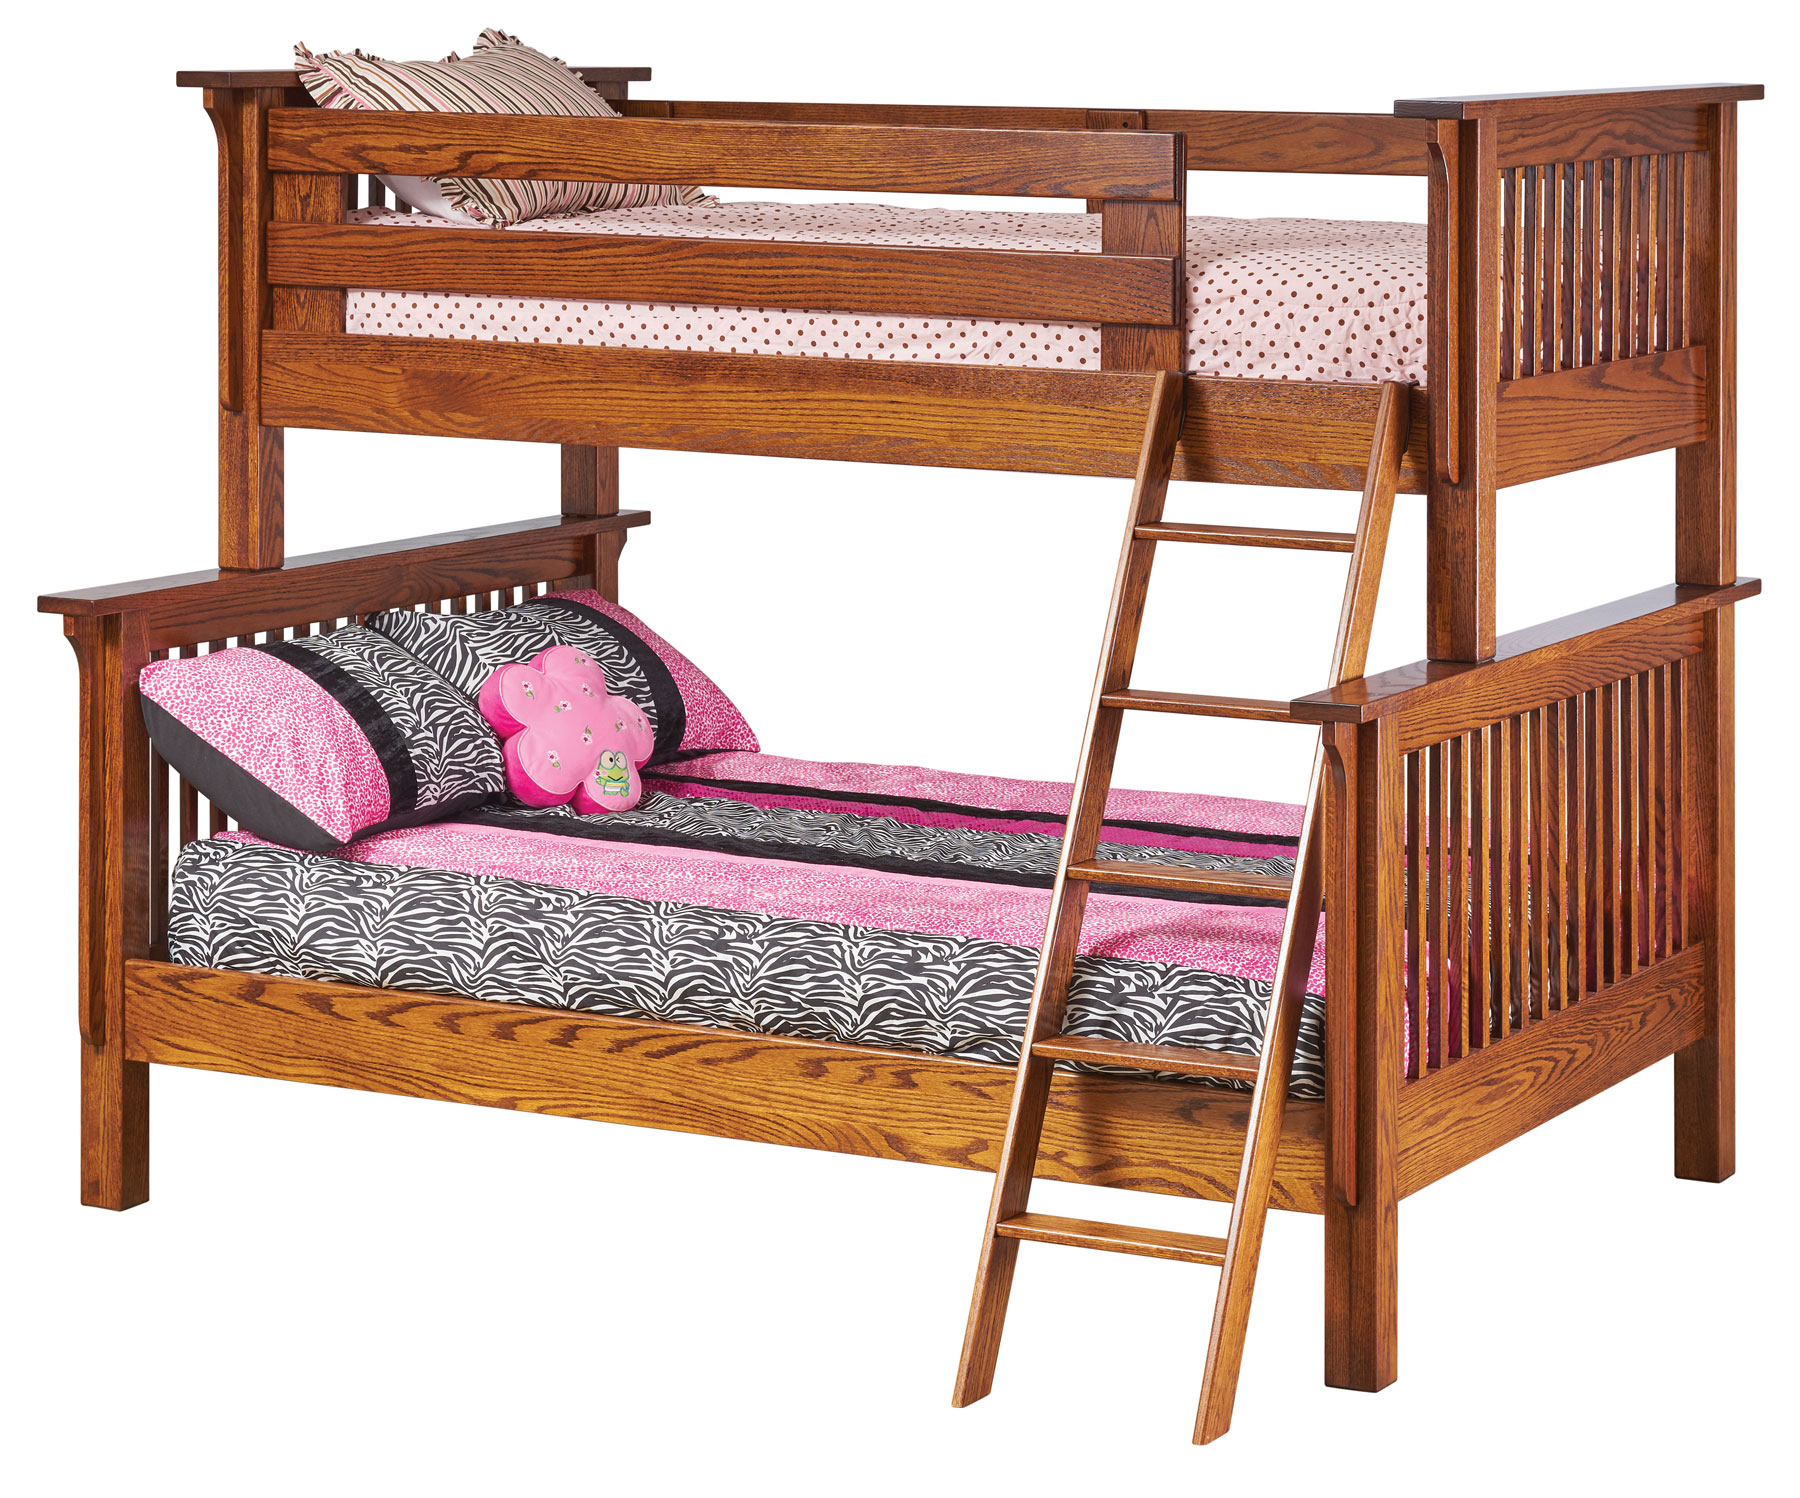 Prairie Mission Twin over Full Bunk Bed